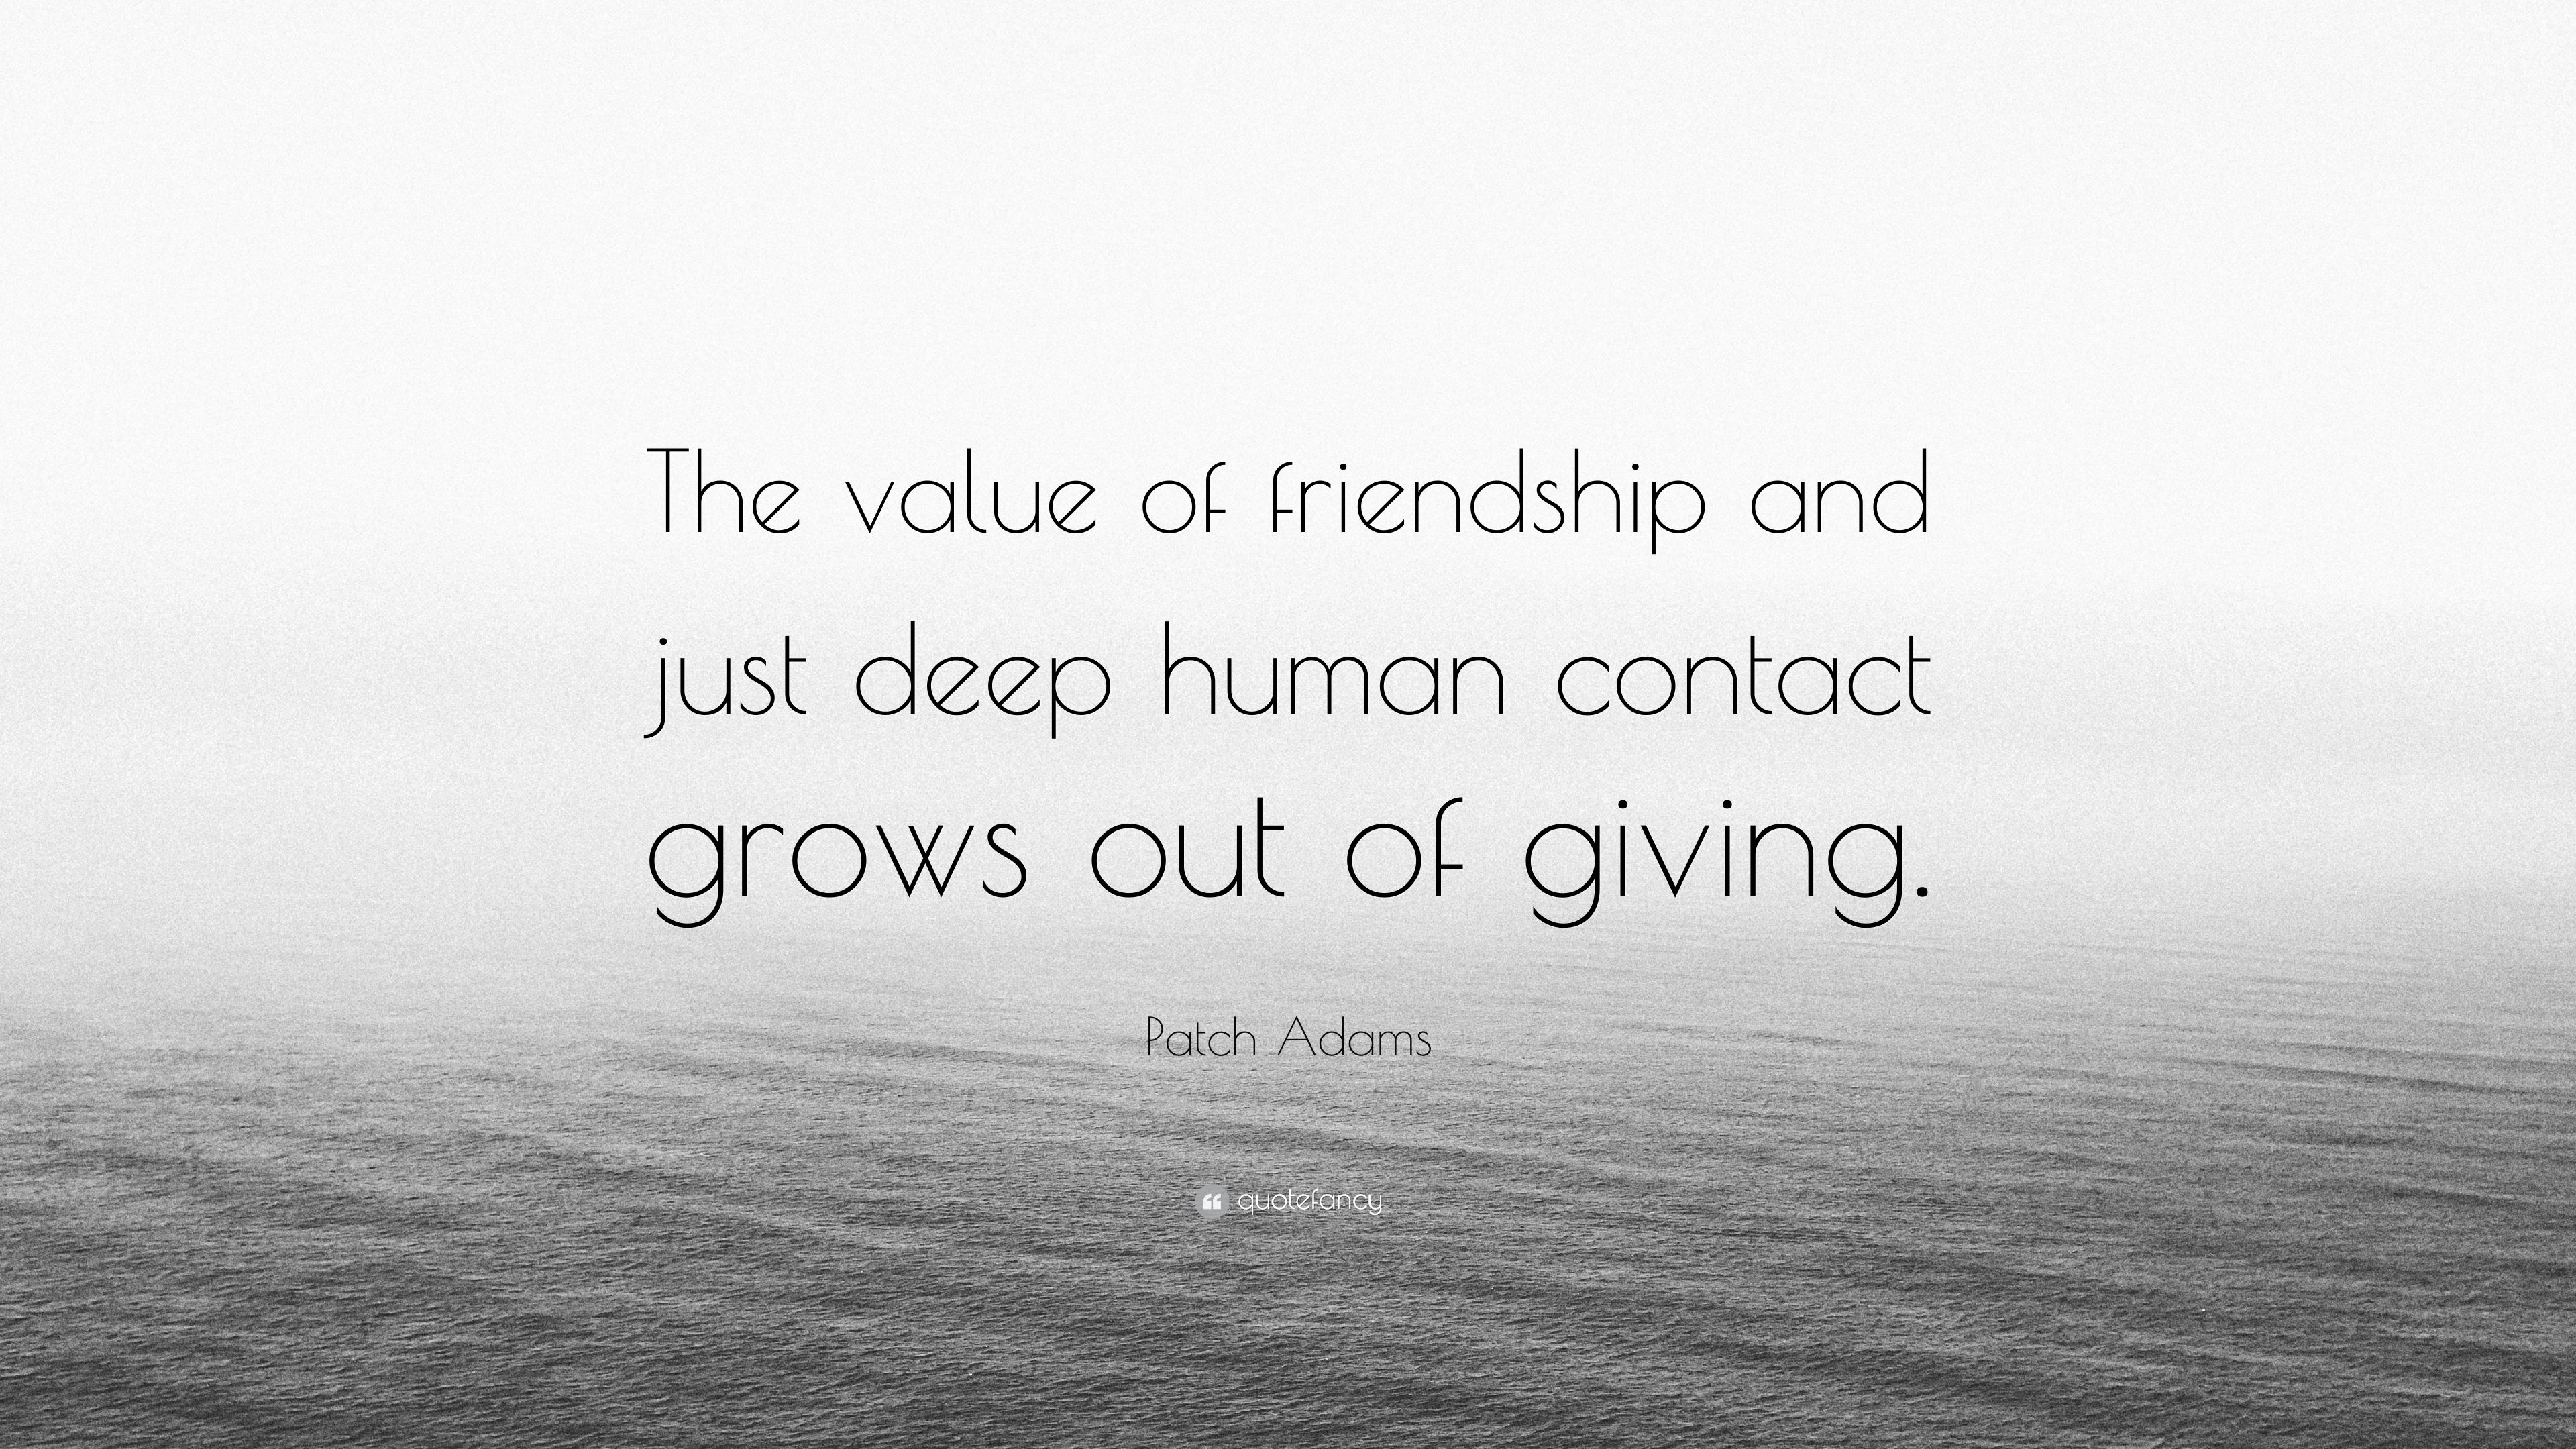 Patch Adams Quote: “The value of friendship and just deep human